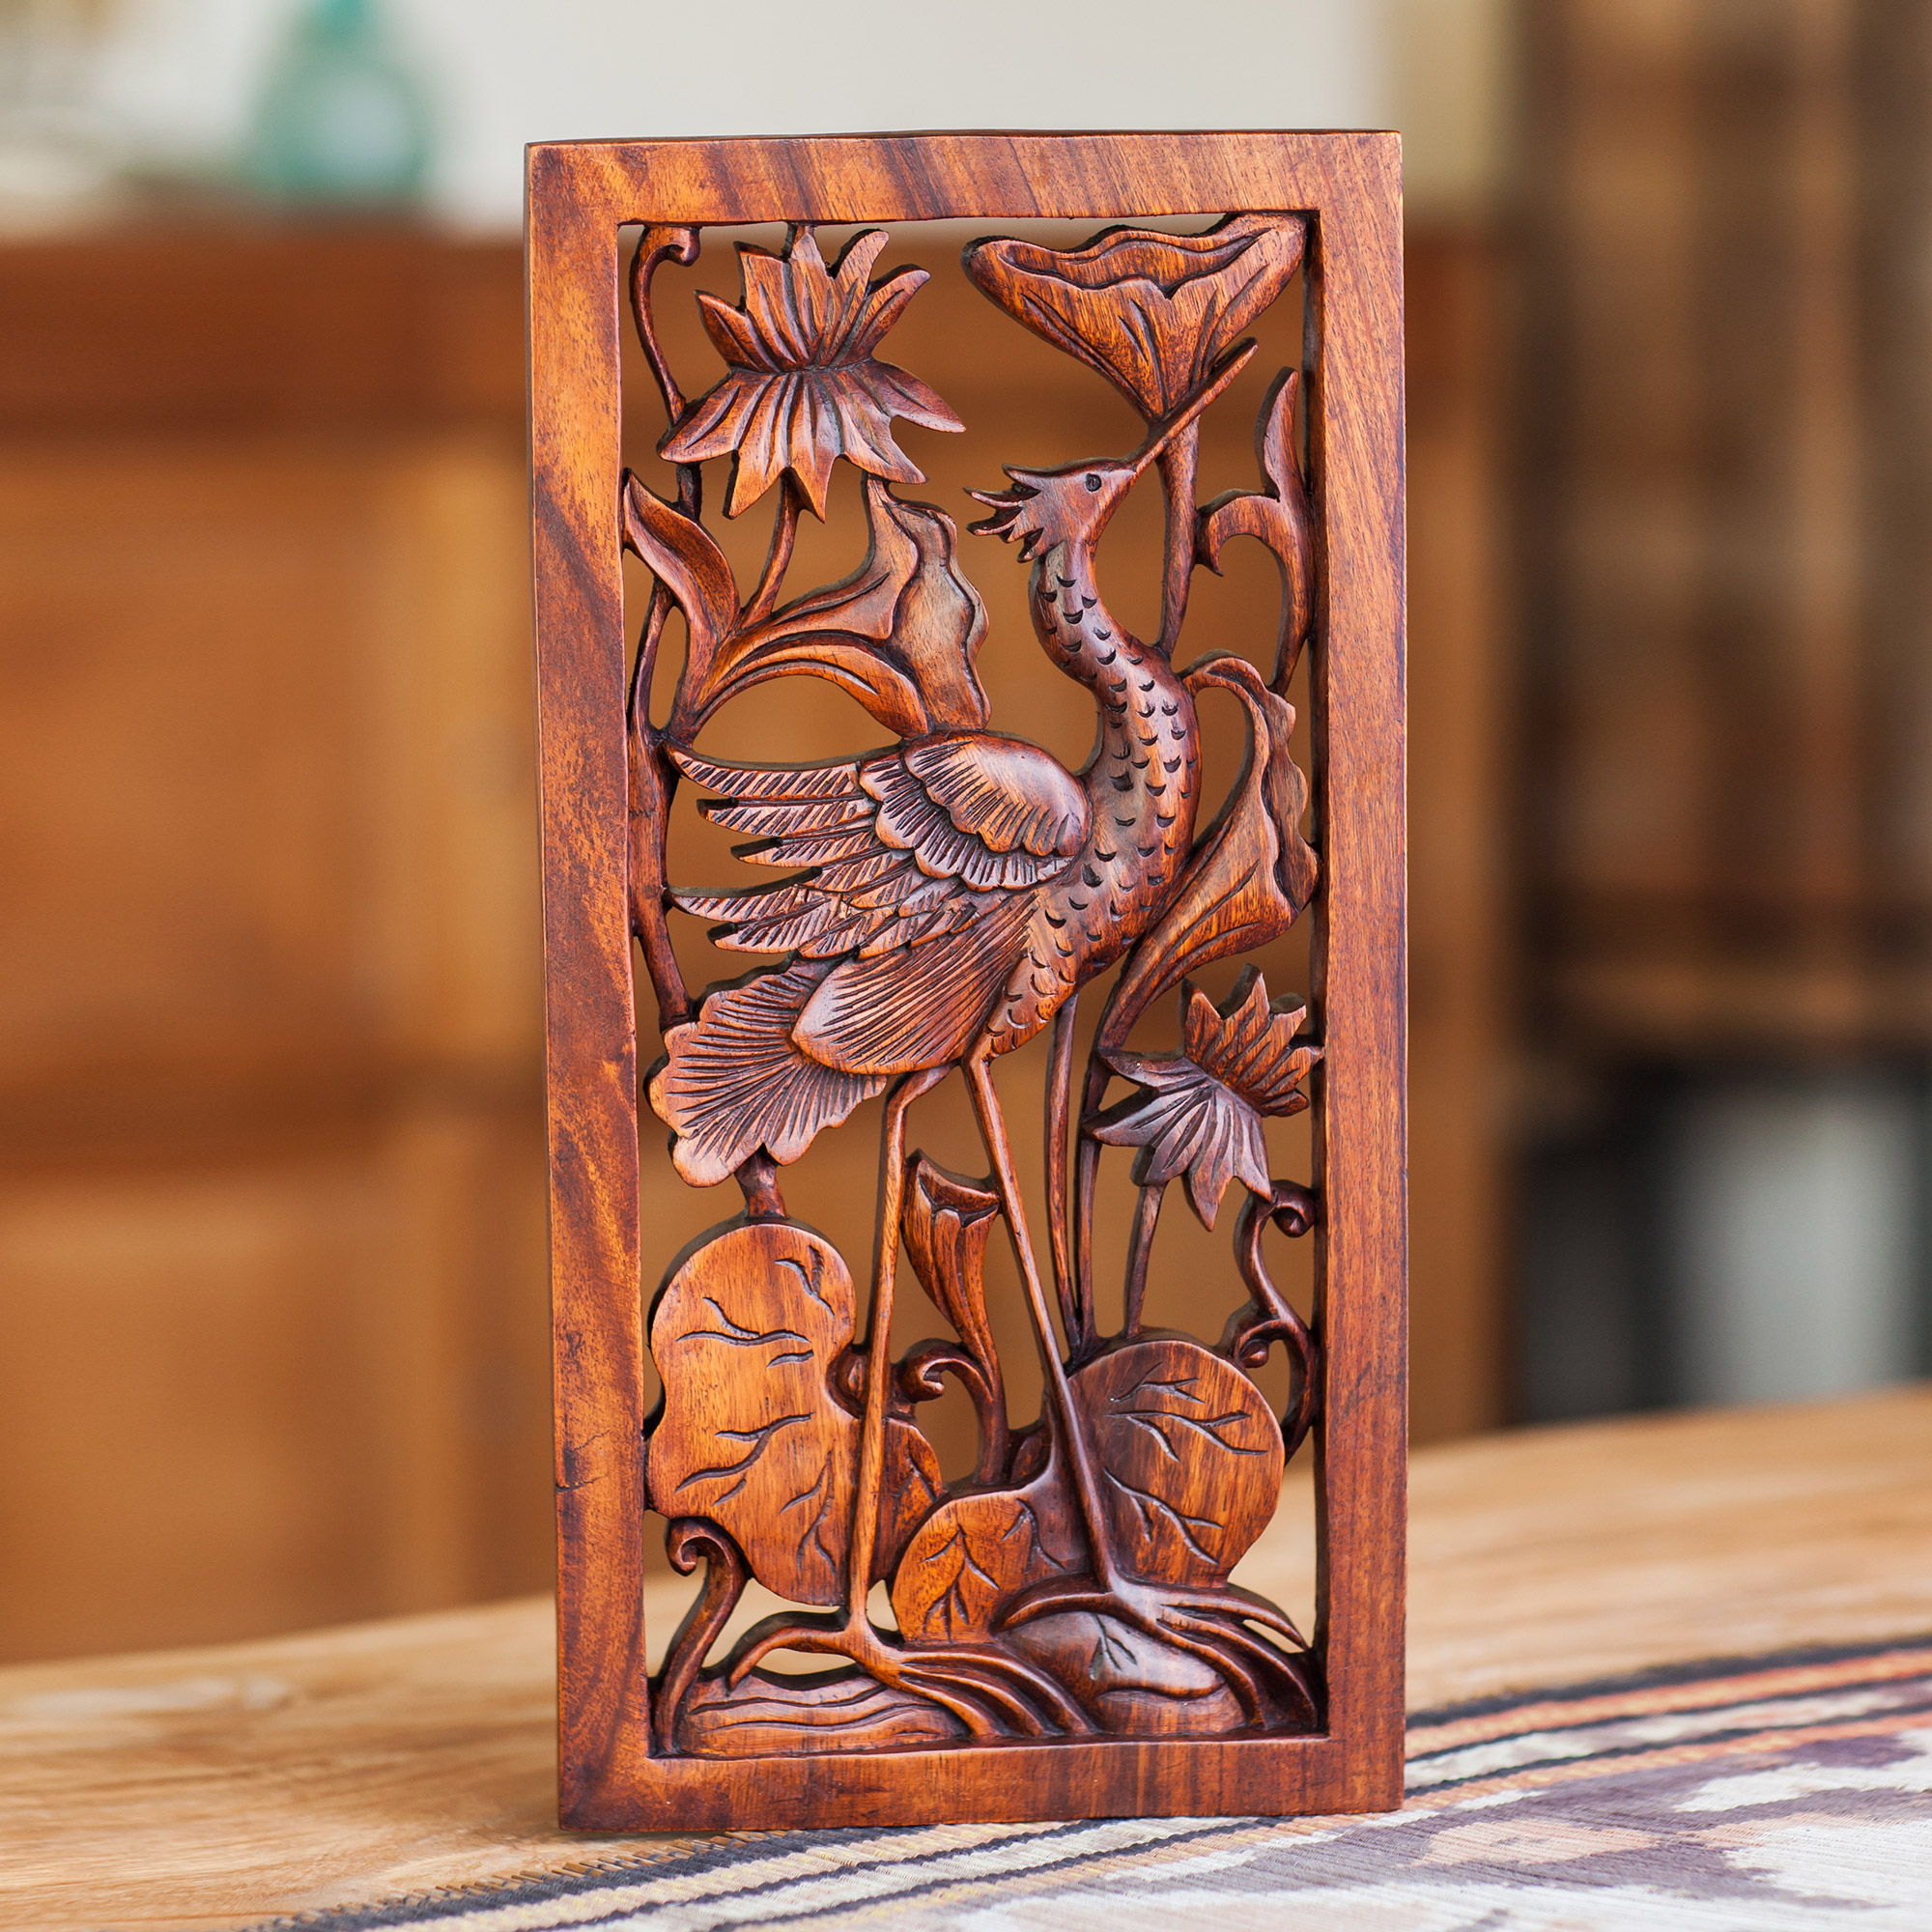 Carved Wood Bird Relief Panel Stork with Lotus Blossoms NOVICA